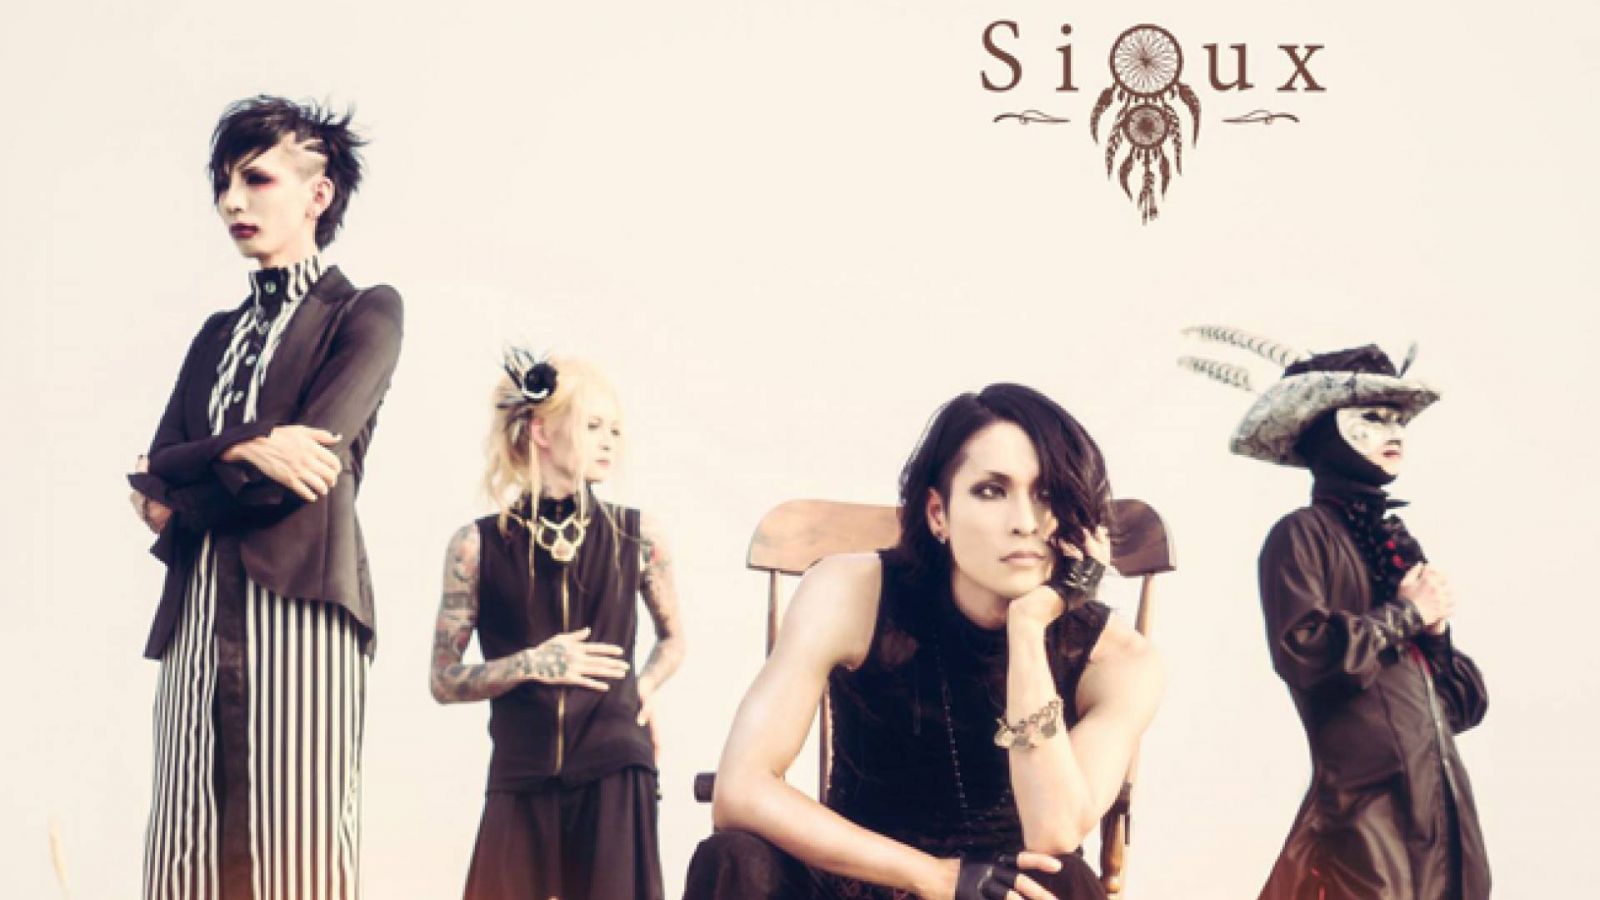 Sioux © Sioux. All rights reserved.